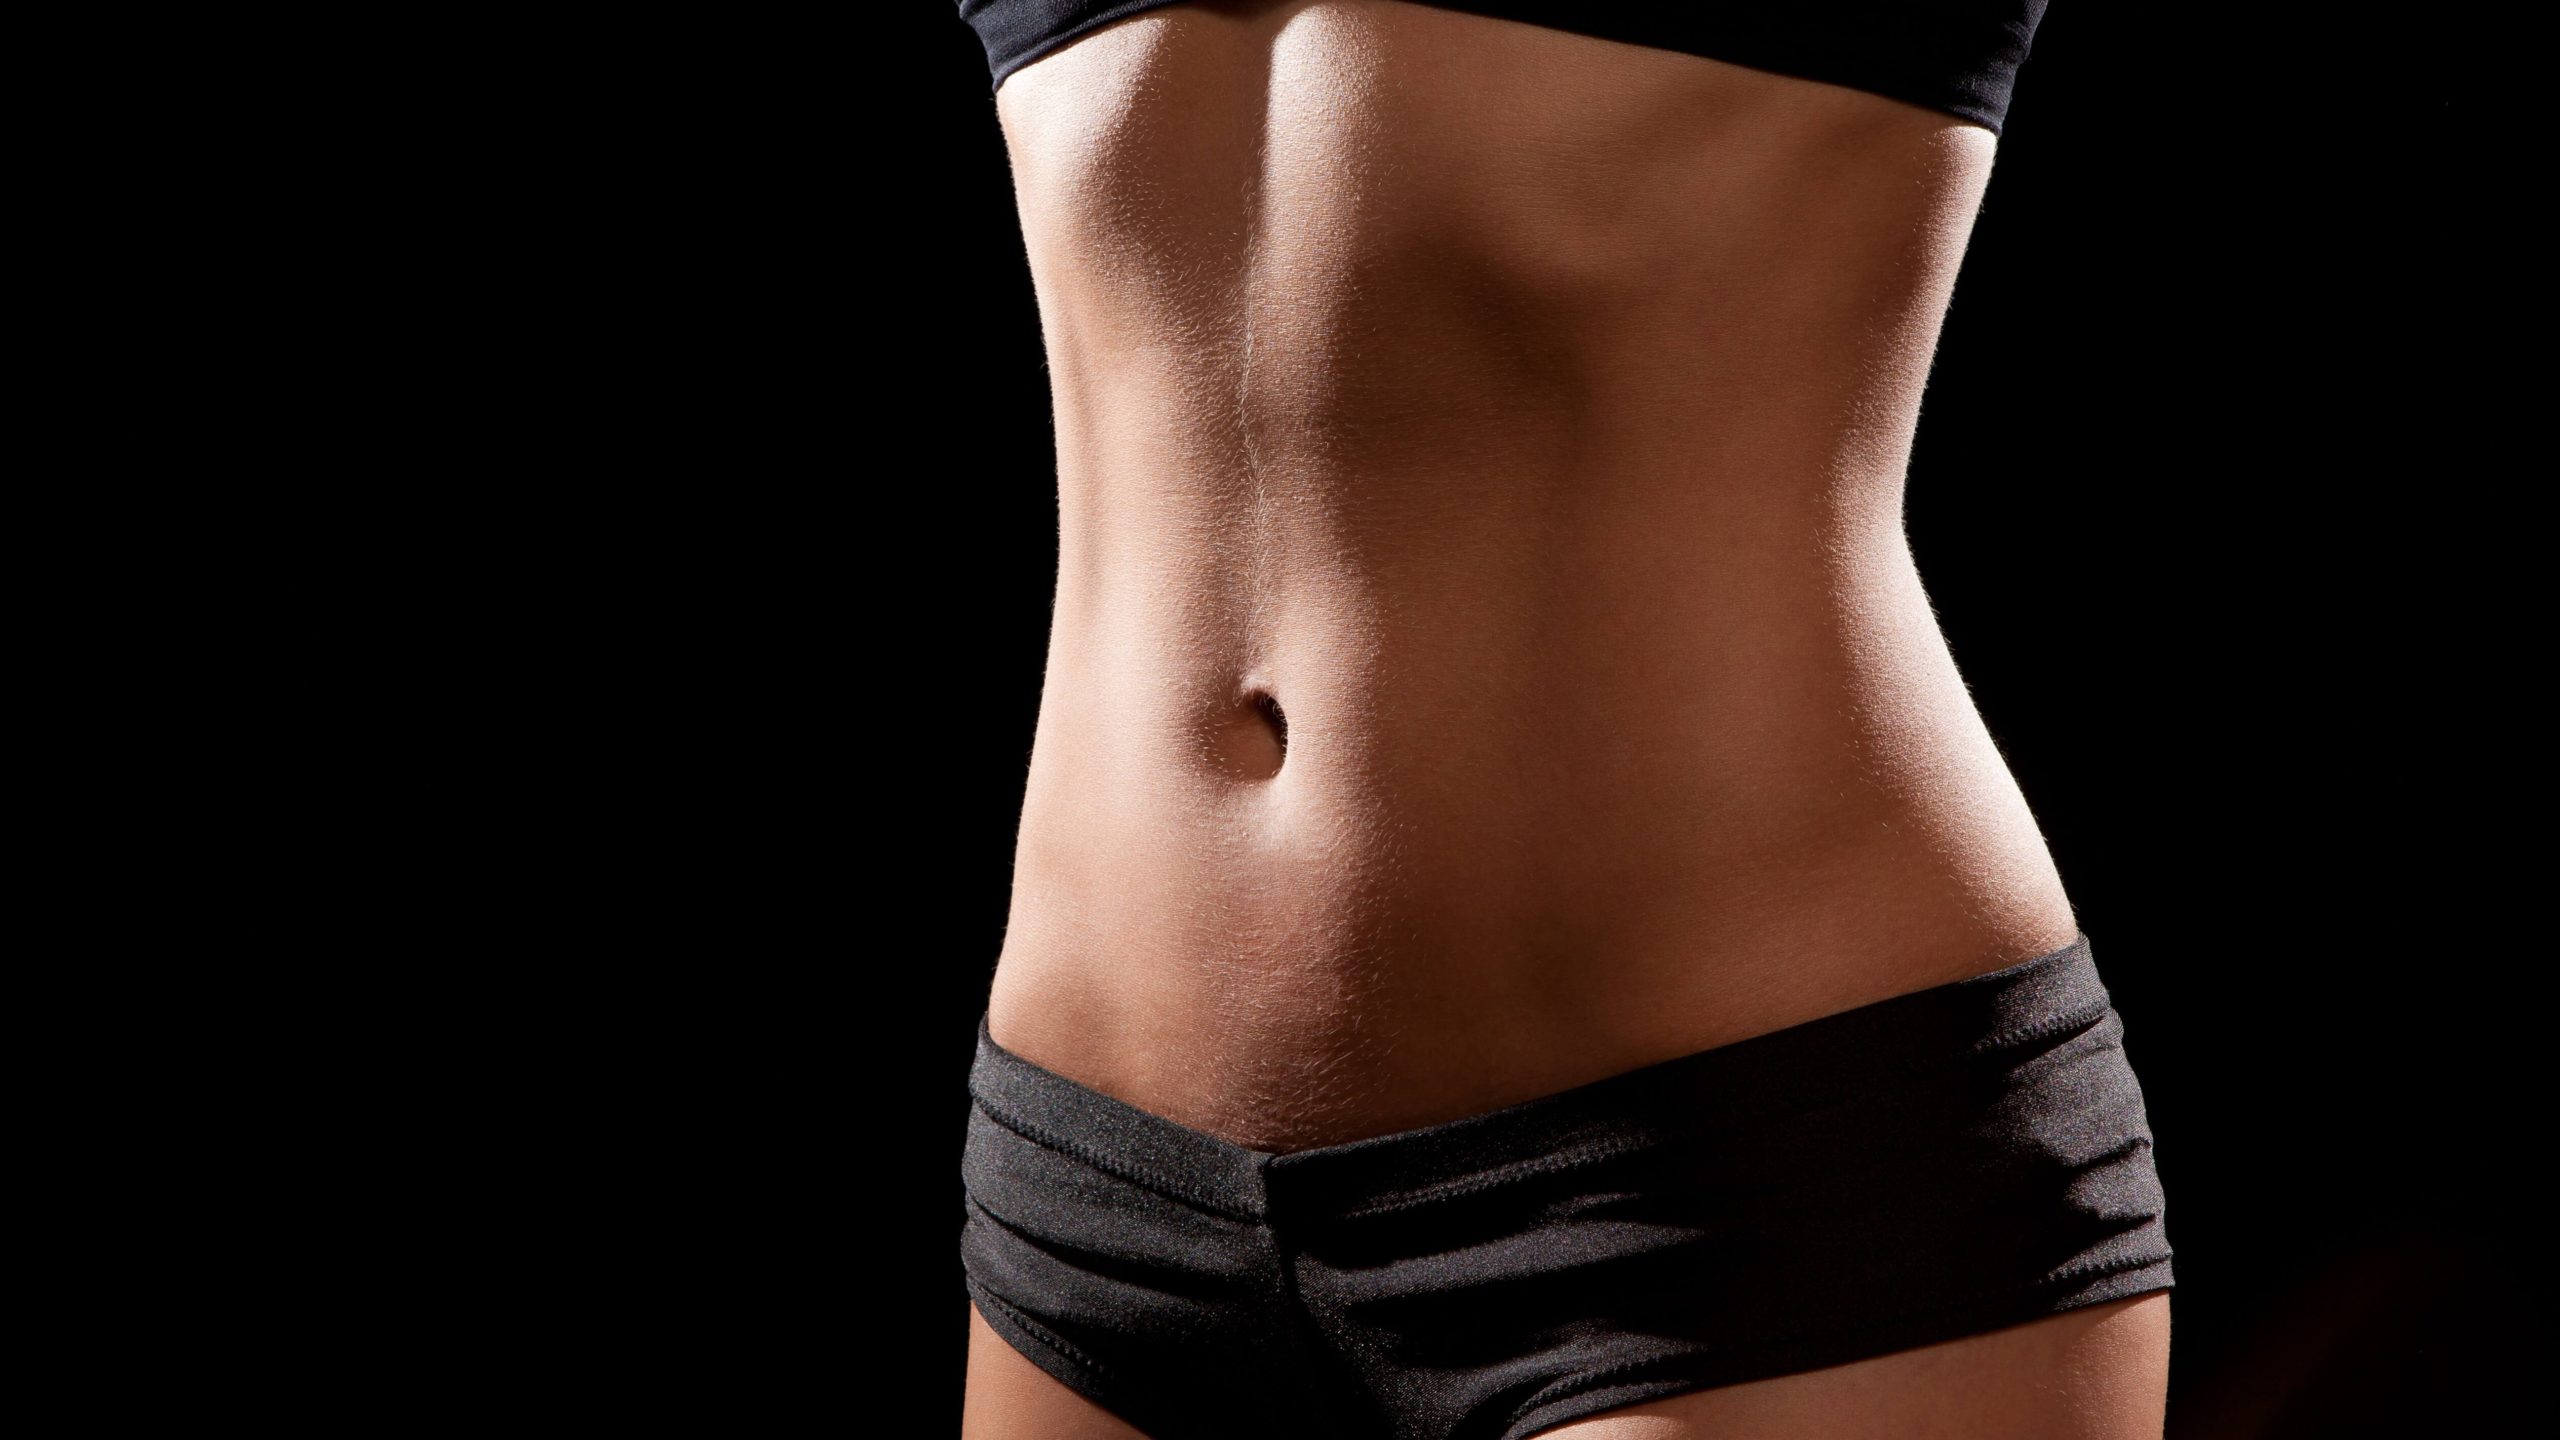 Can CoolSculpting® Be Used Anywhere on the Body?